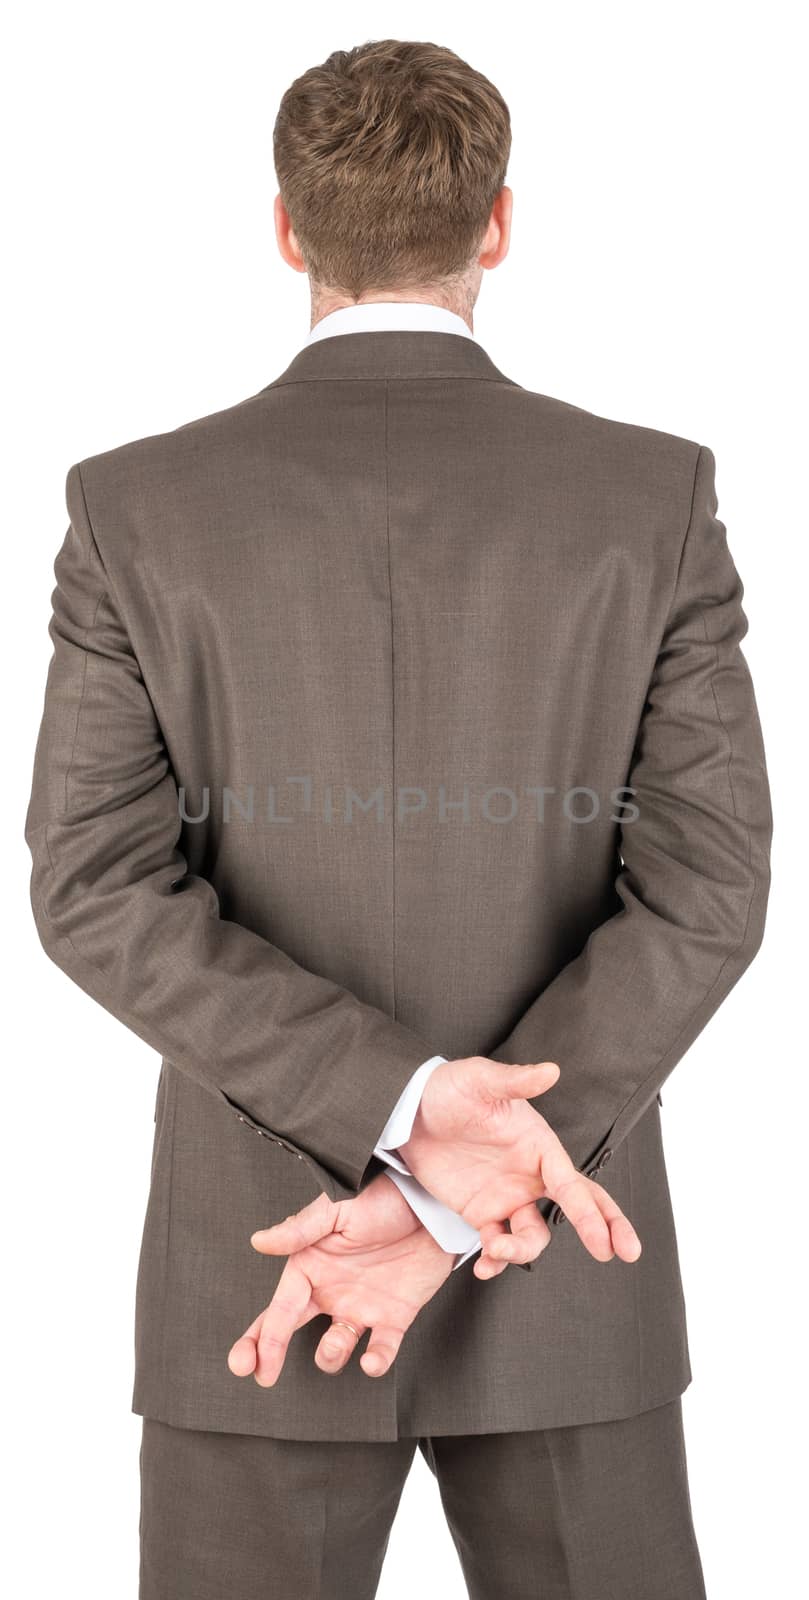 Businessman crossing his fingers behind his back isolated on white background